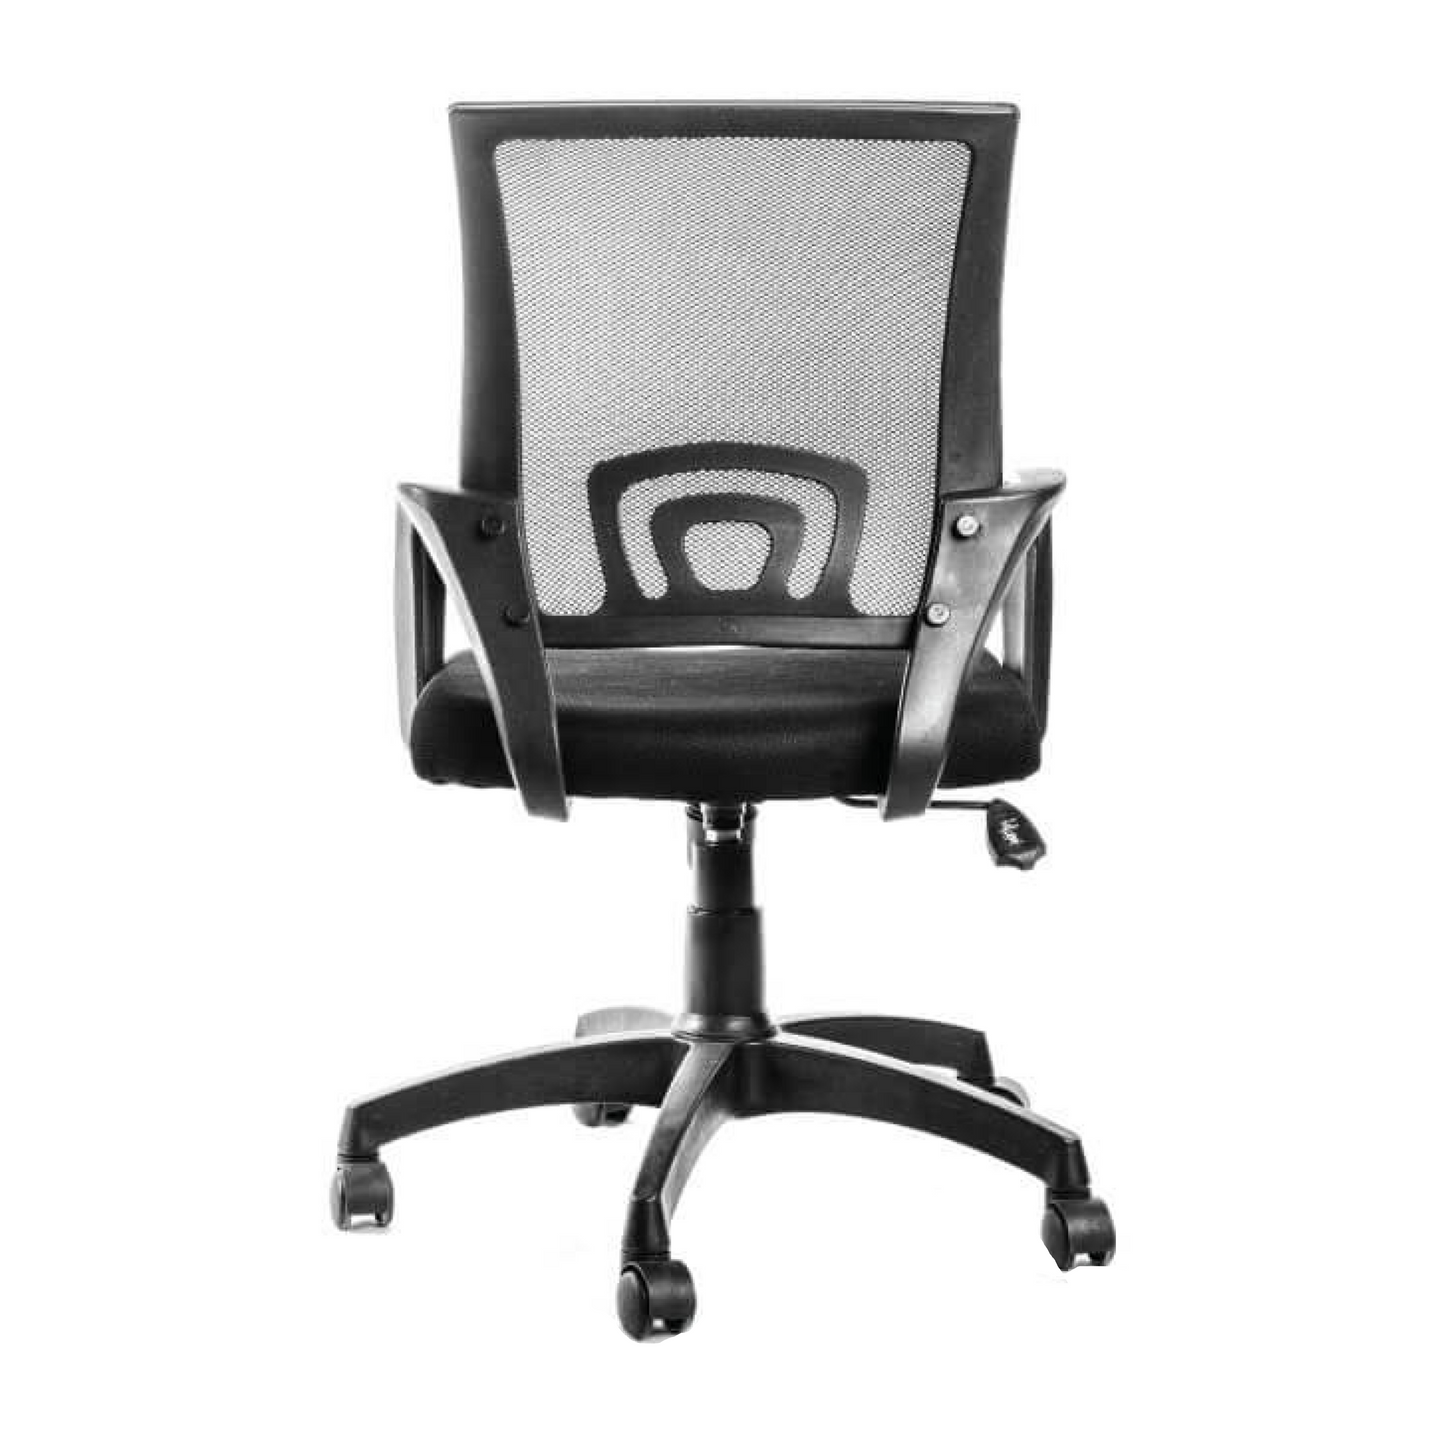 Best Office Chair - Model No. KP-VIper ECO